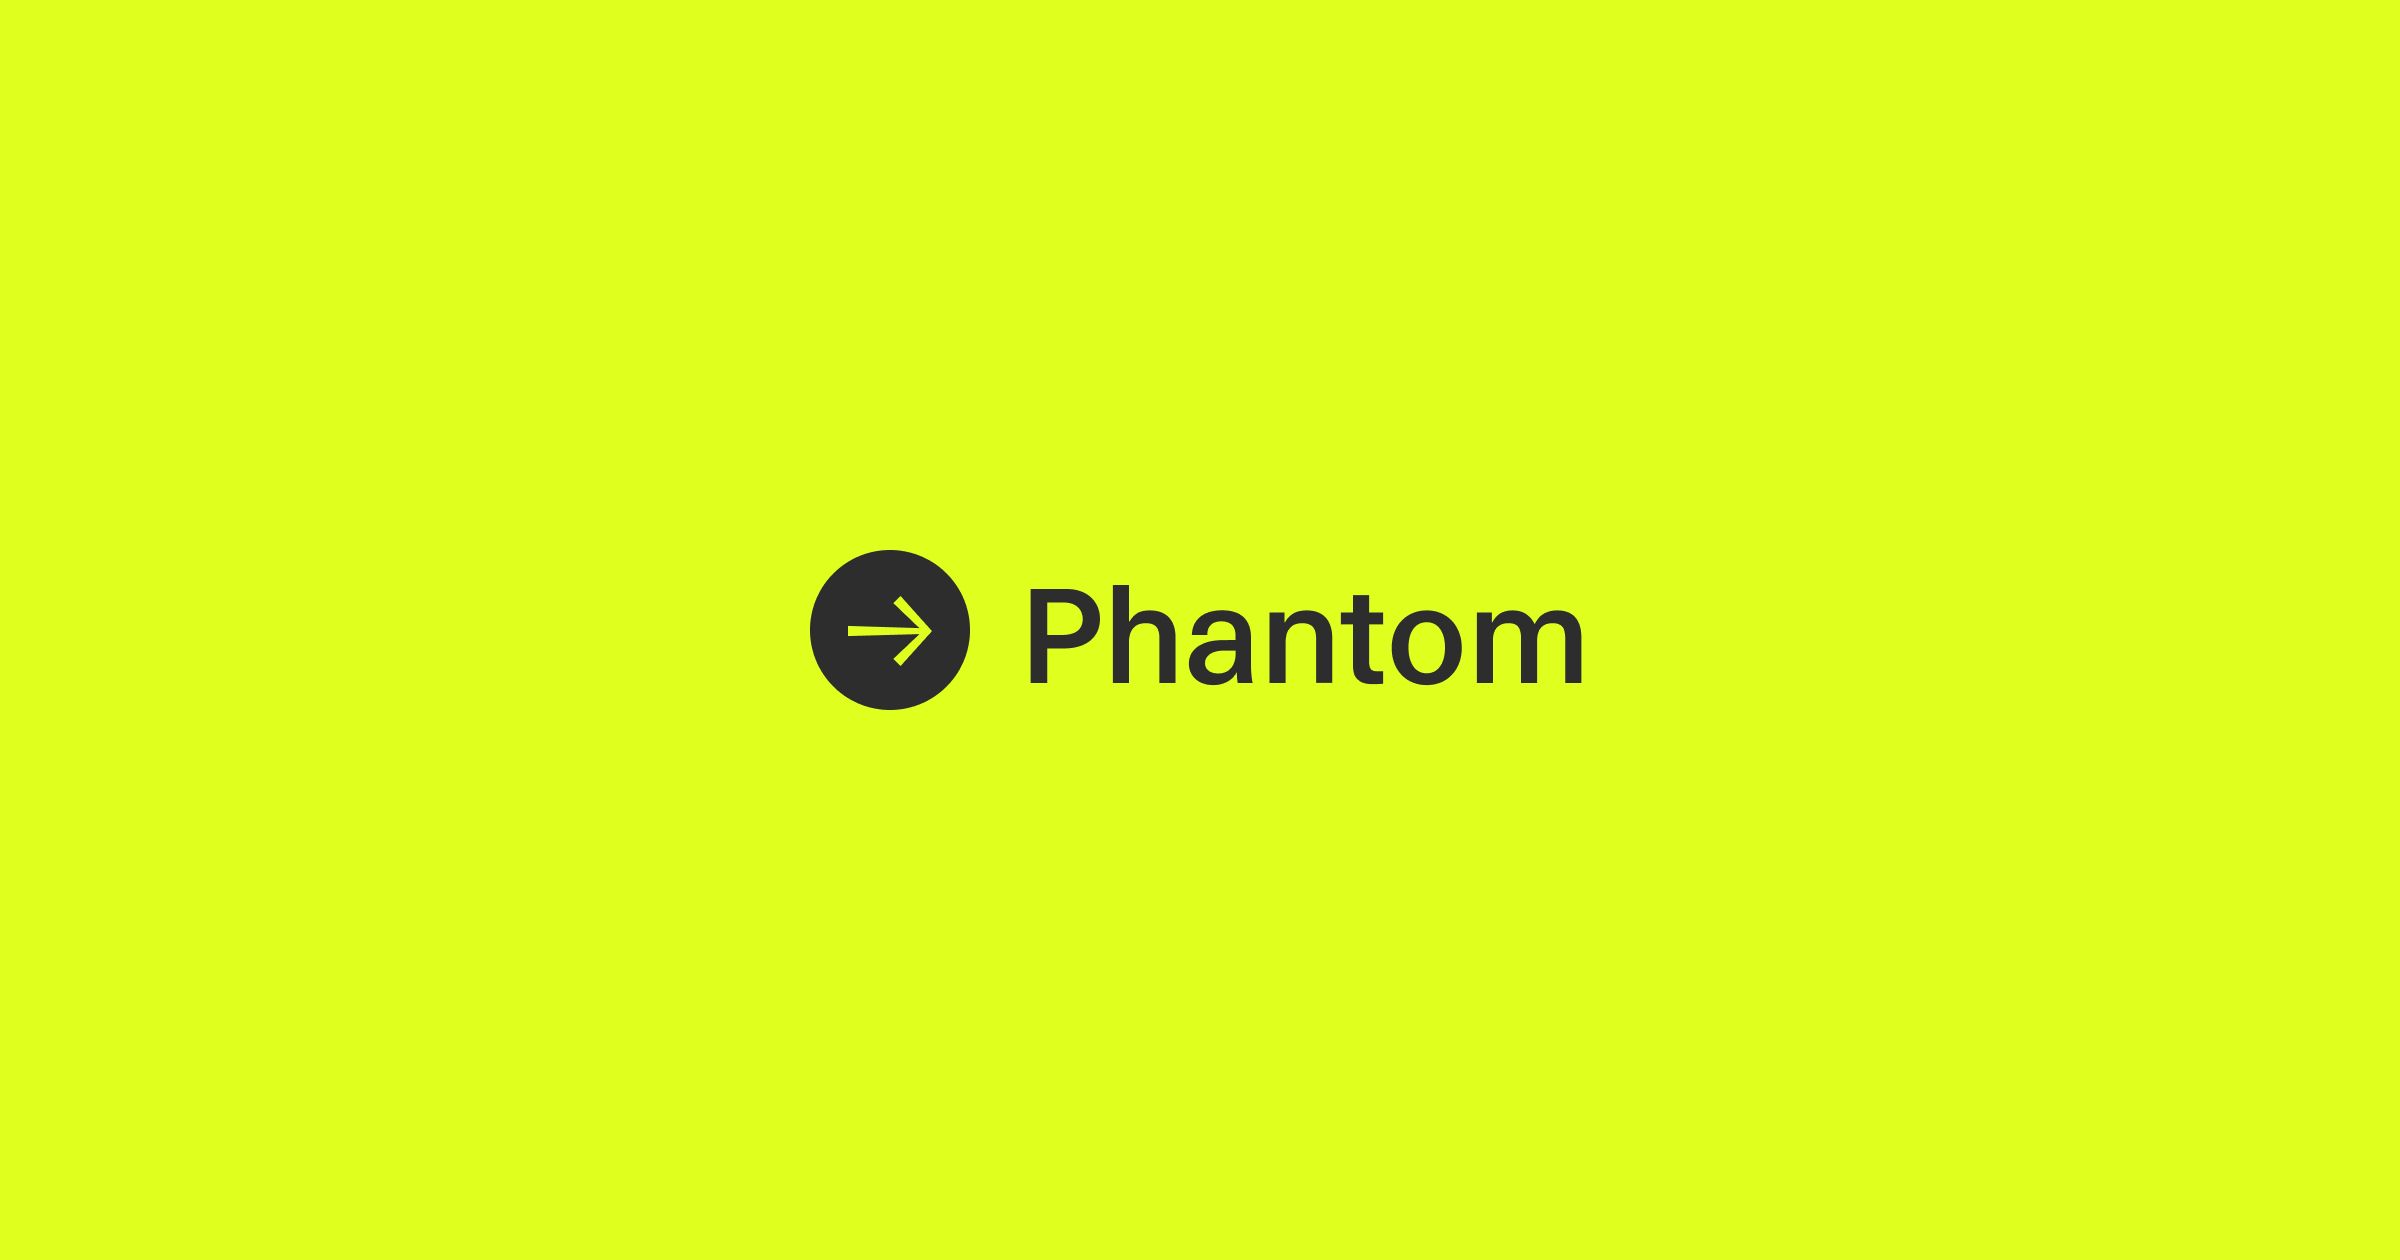 Phantom Vector Art, Icons, and Graphics for Free Download